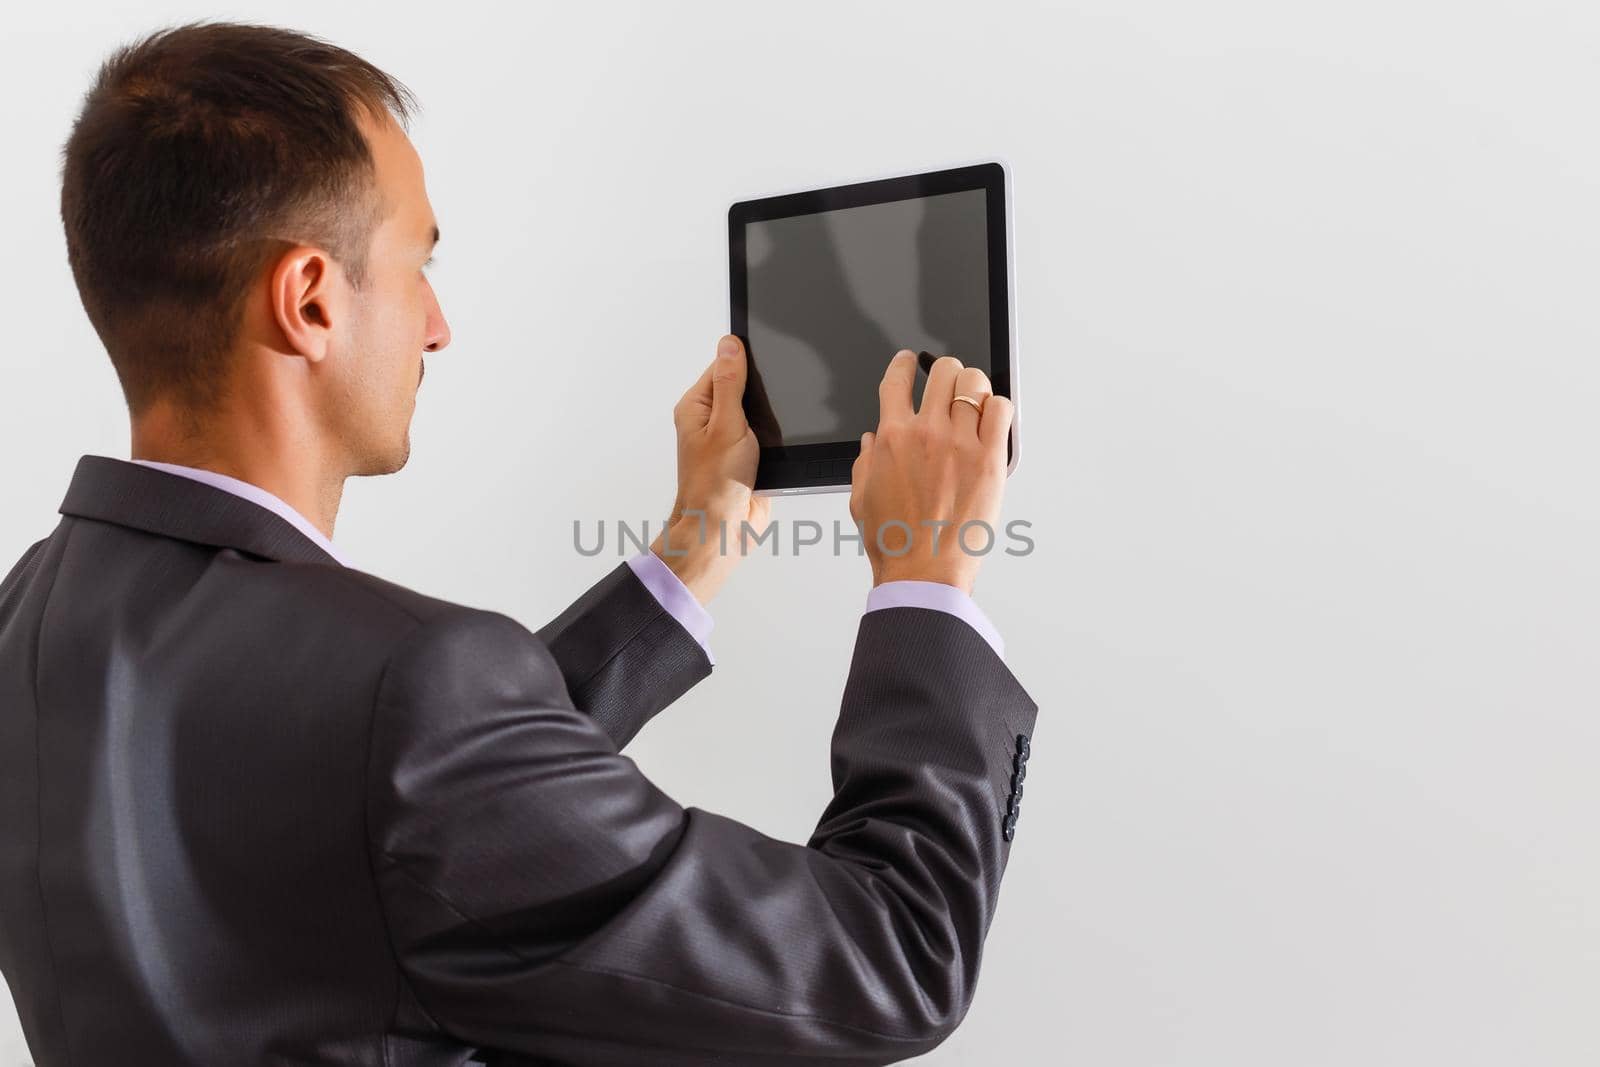 businessman holding a blank white board, signboard, showing an emty bill board against white background